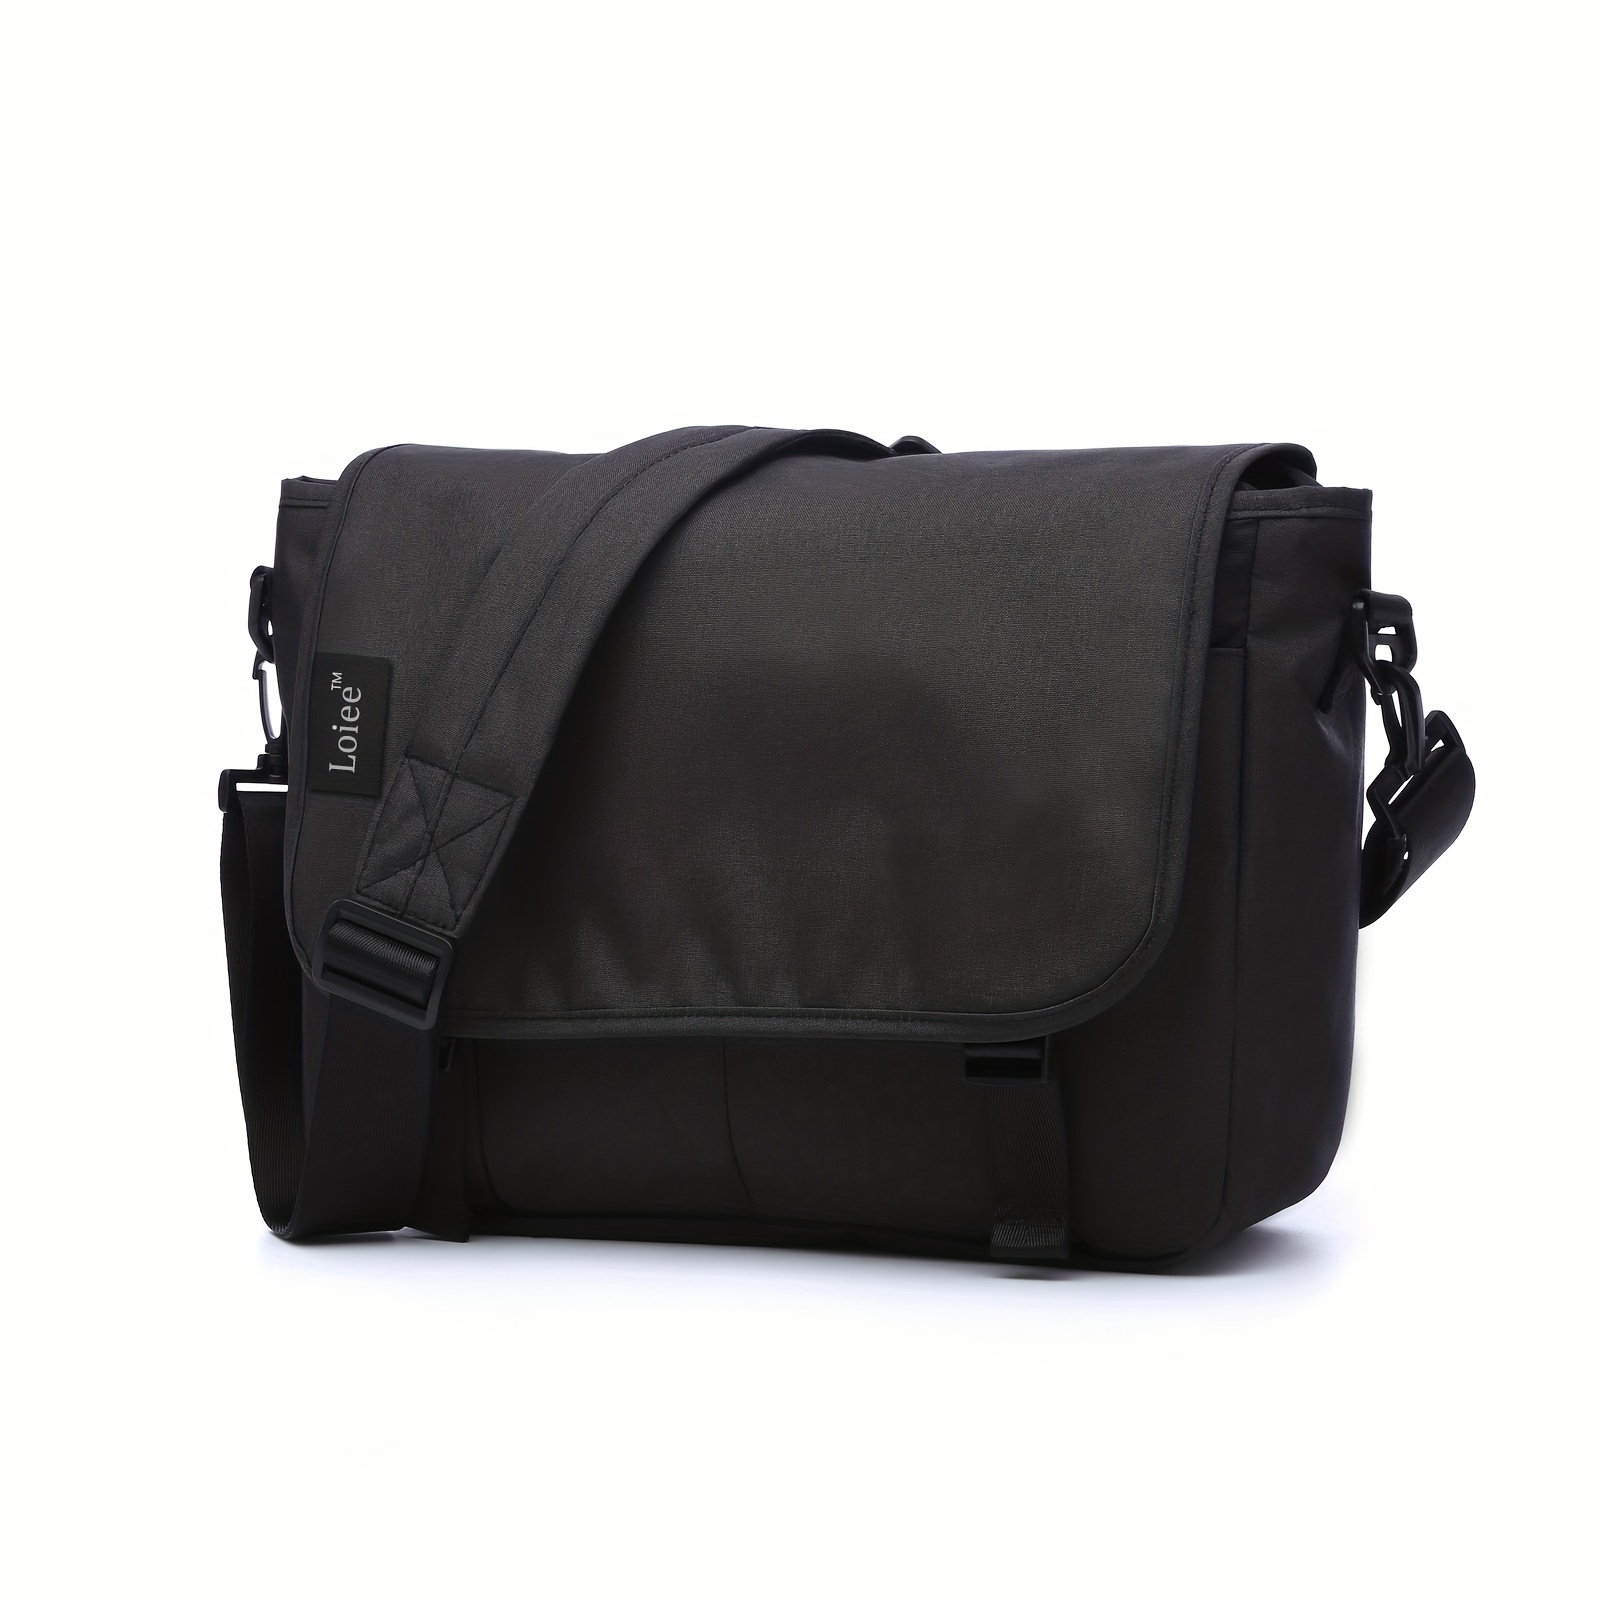 Buy Black Flap Envelop Bag with Adjustable Strap, Large Capacity, Waterproof Material at Our Store